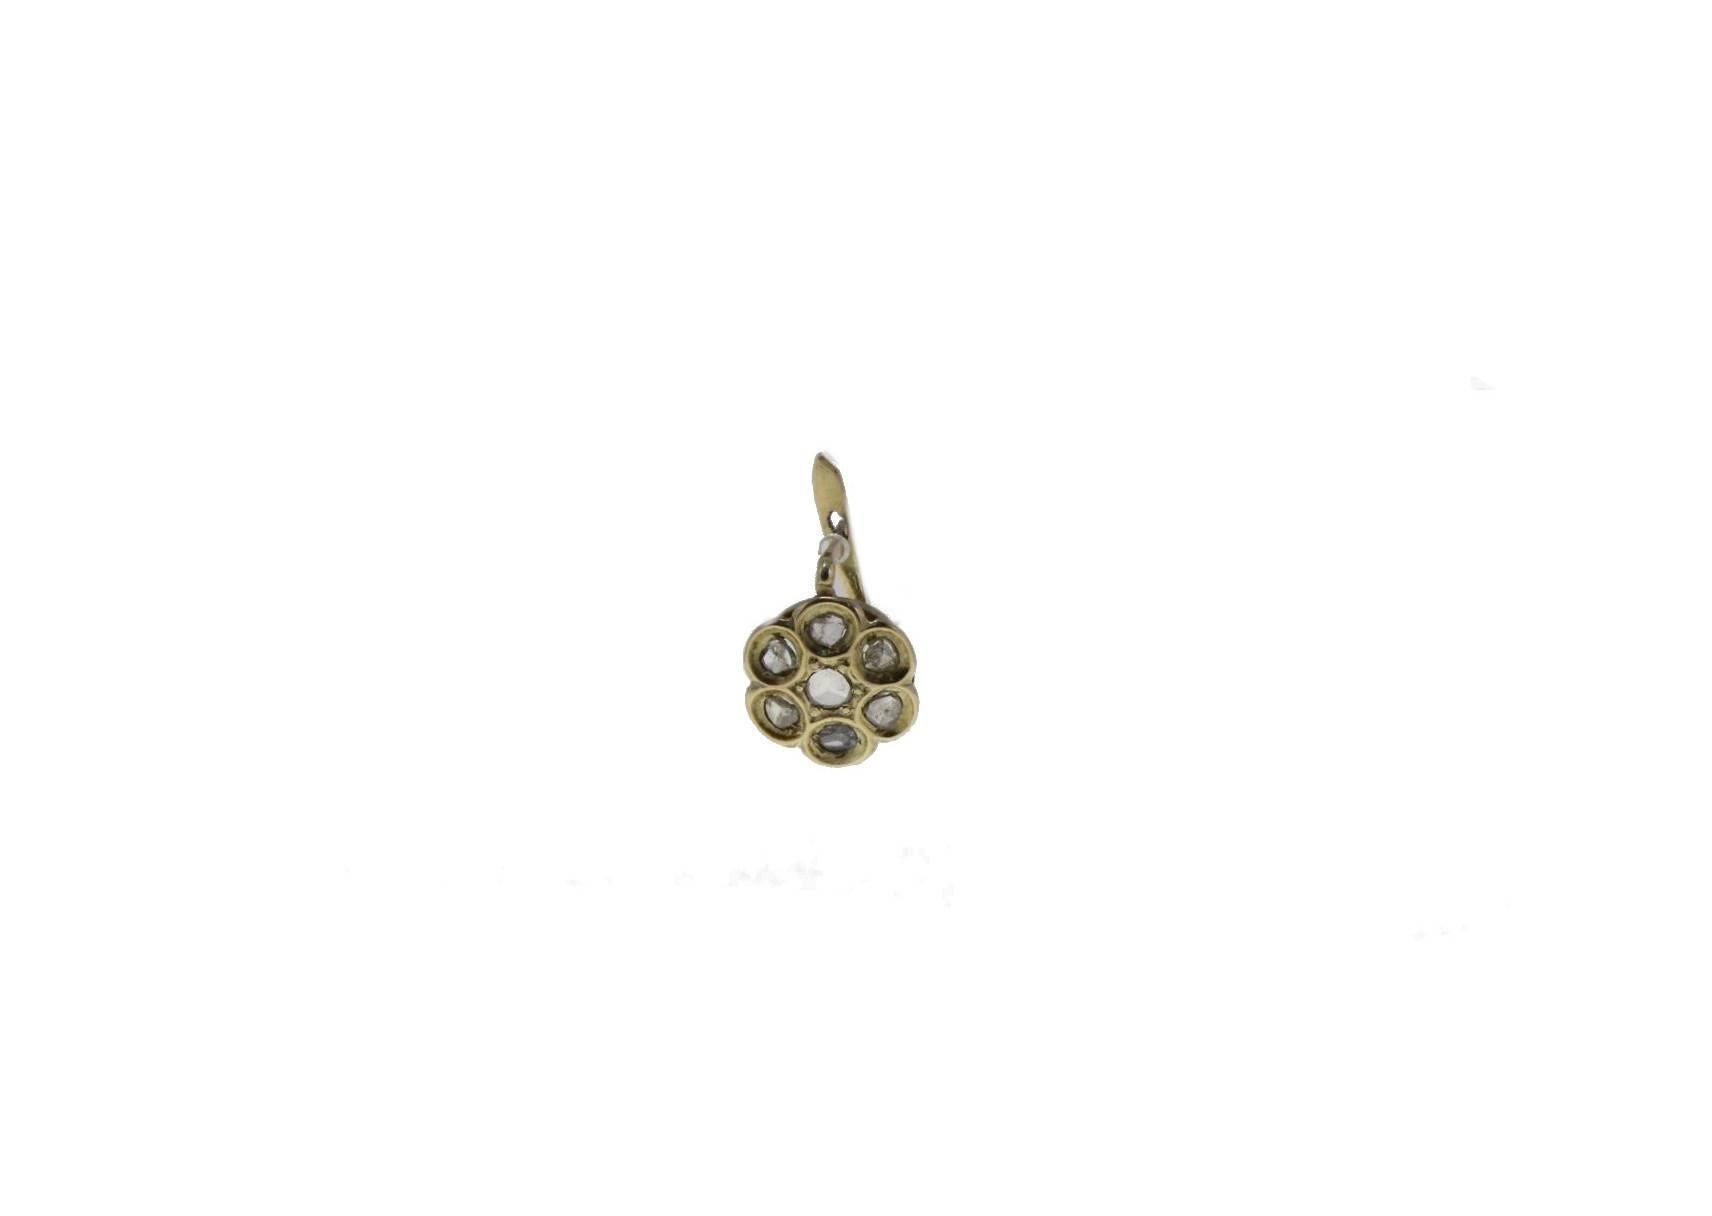 Retro flower shaped earrings in 12kt yellow gold with encrusted diamonds.

diamonds 0.88kt
tot weight 1.2gr
r.f.  ggeh